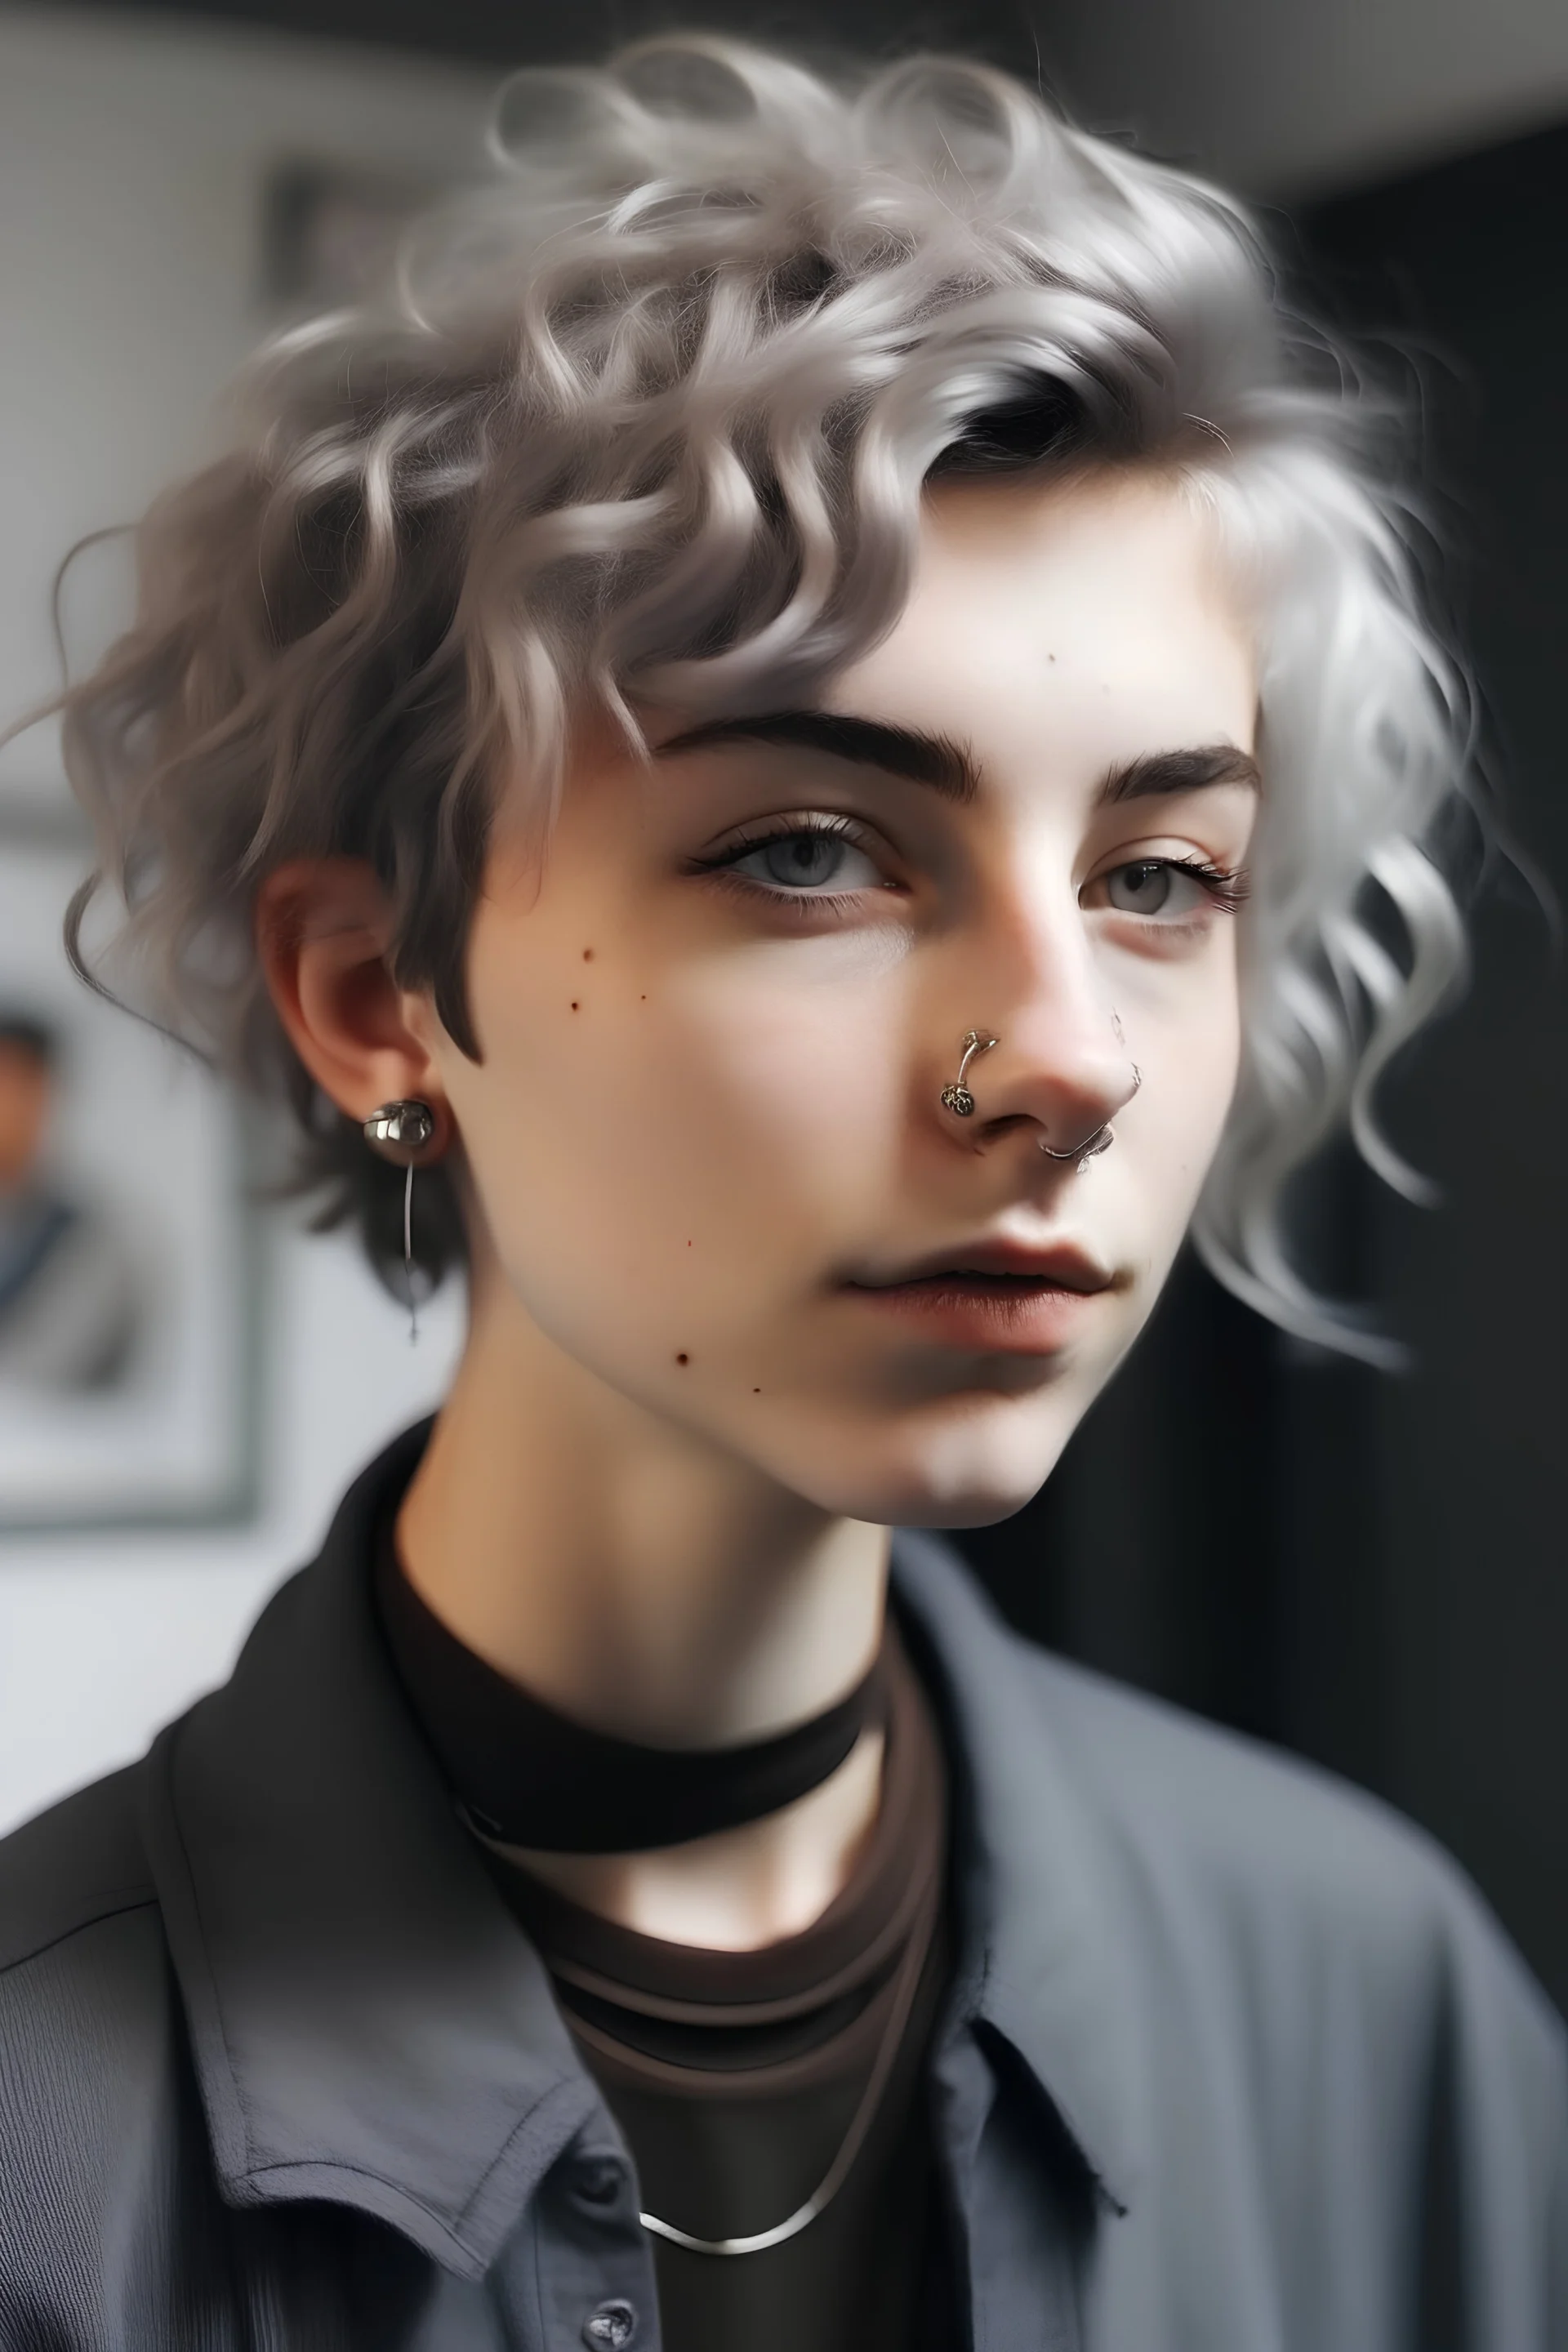 androgynous masc teen with fluffy curly short silver hair and piercings